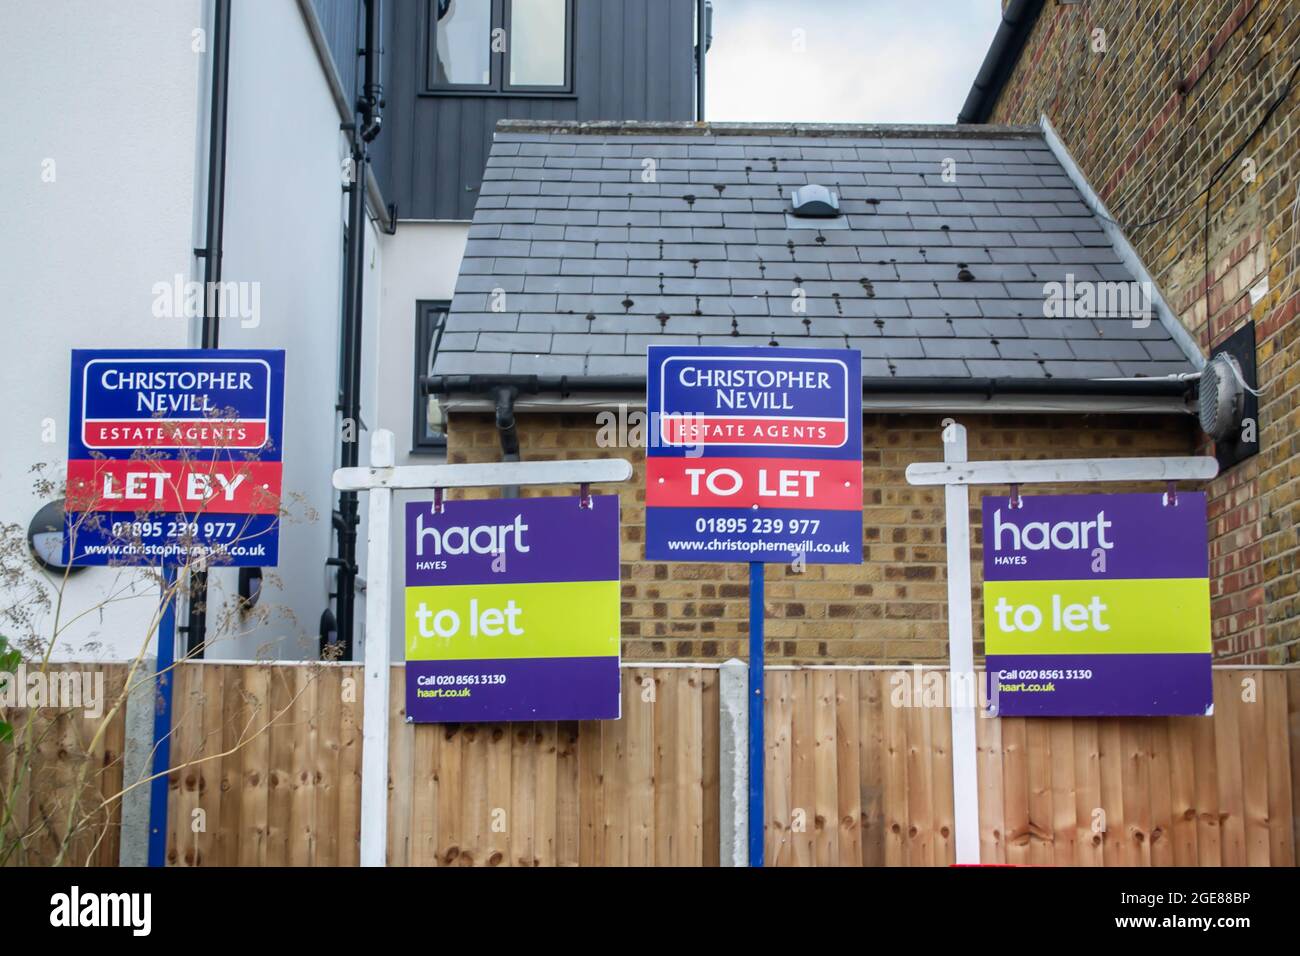 HILLINGDON, LONDON, ENGLAND - 14 August 2021: To let signs outside a property in London Stock Photo